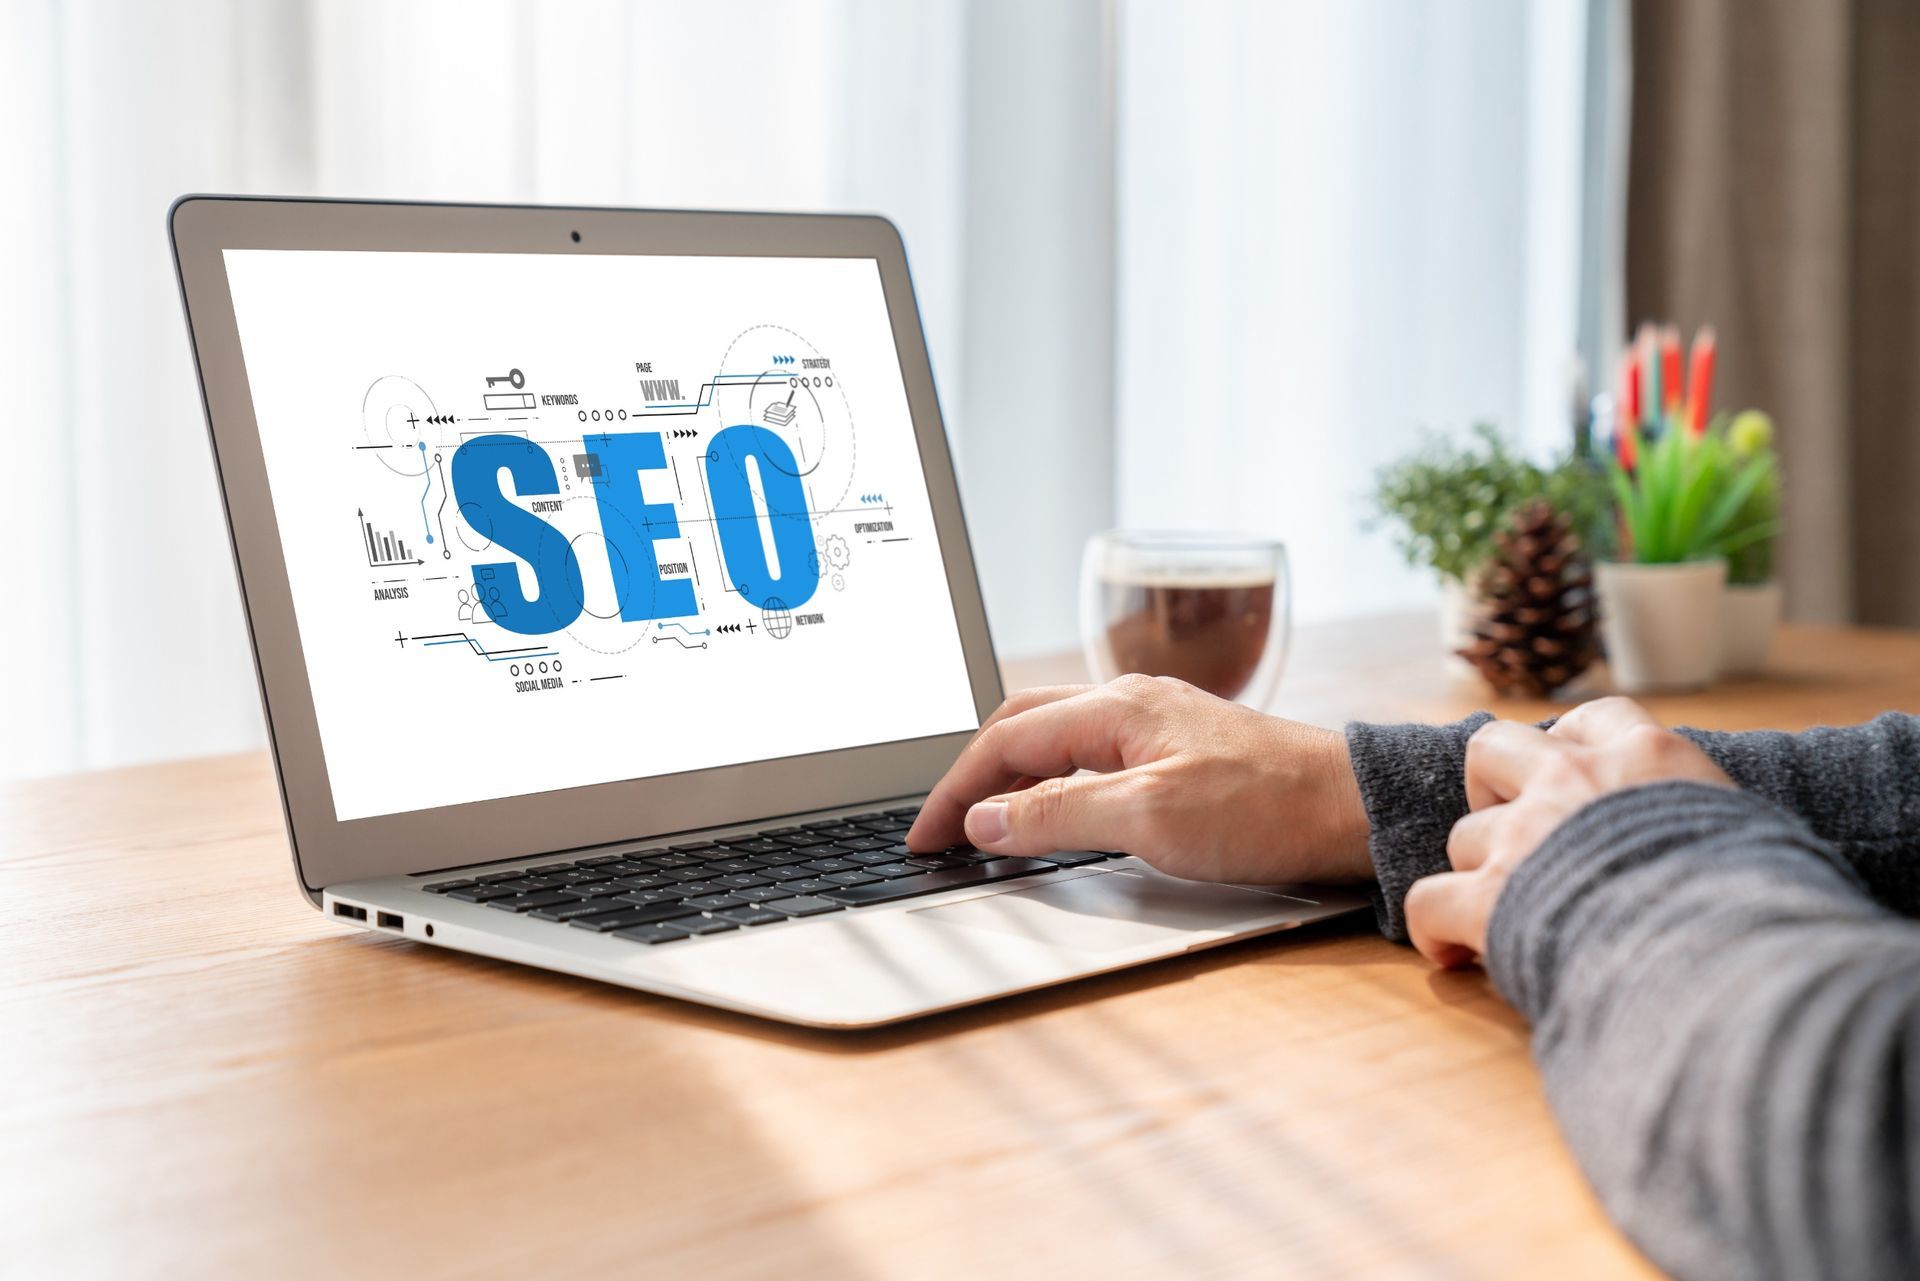 SEO tips for Small Businesses: 8 Ways to Rank Higher